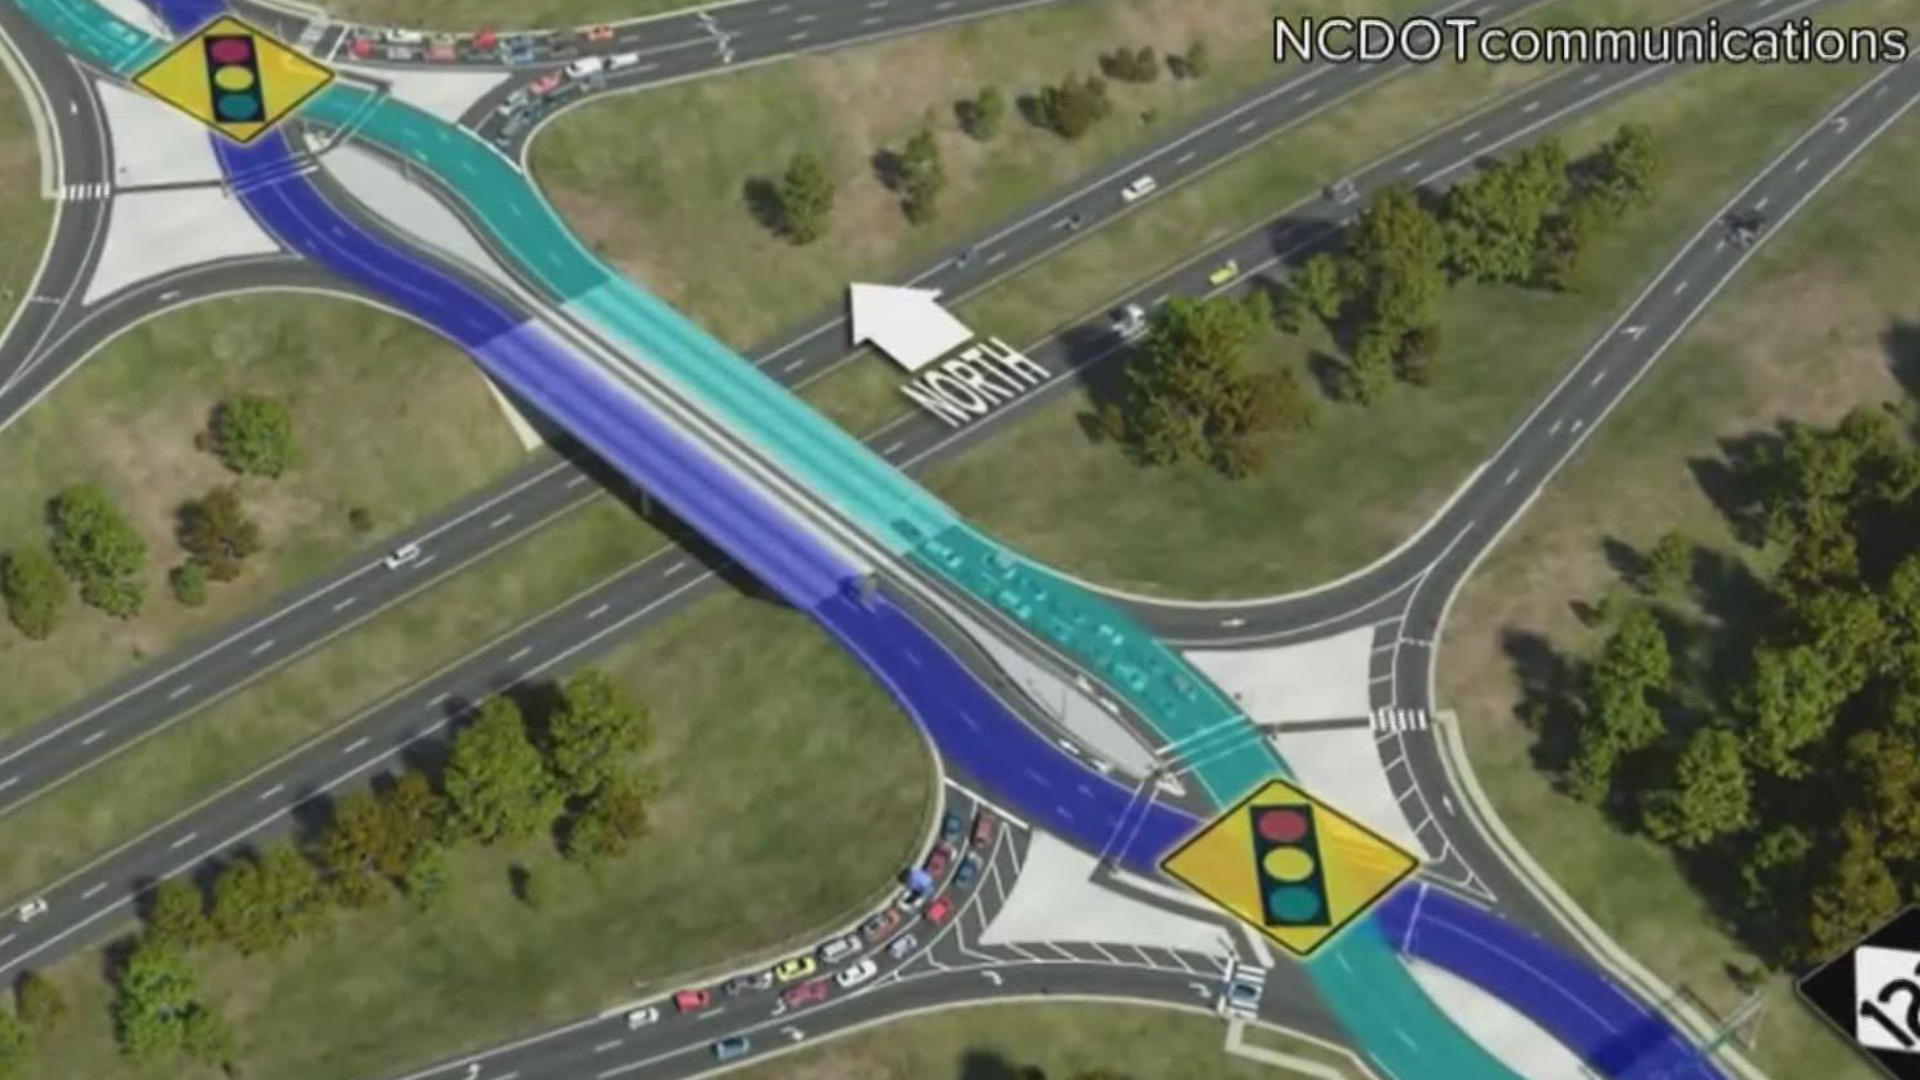 Thousands of drivers in York County are navigating a brand new Diverging Diamond interchange. It opened at the Gold Hill Road Bridge off of I-77.